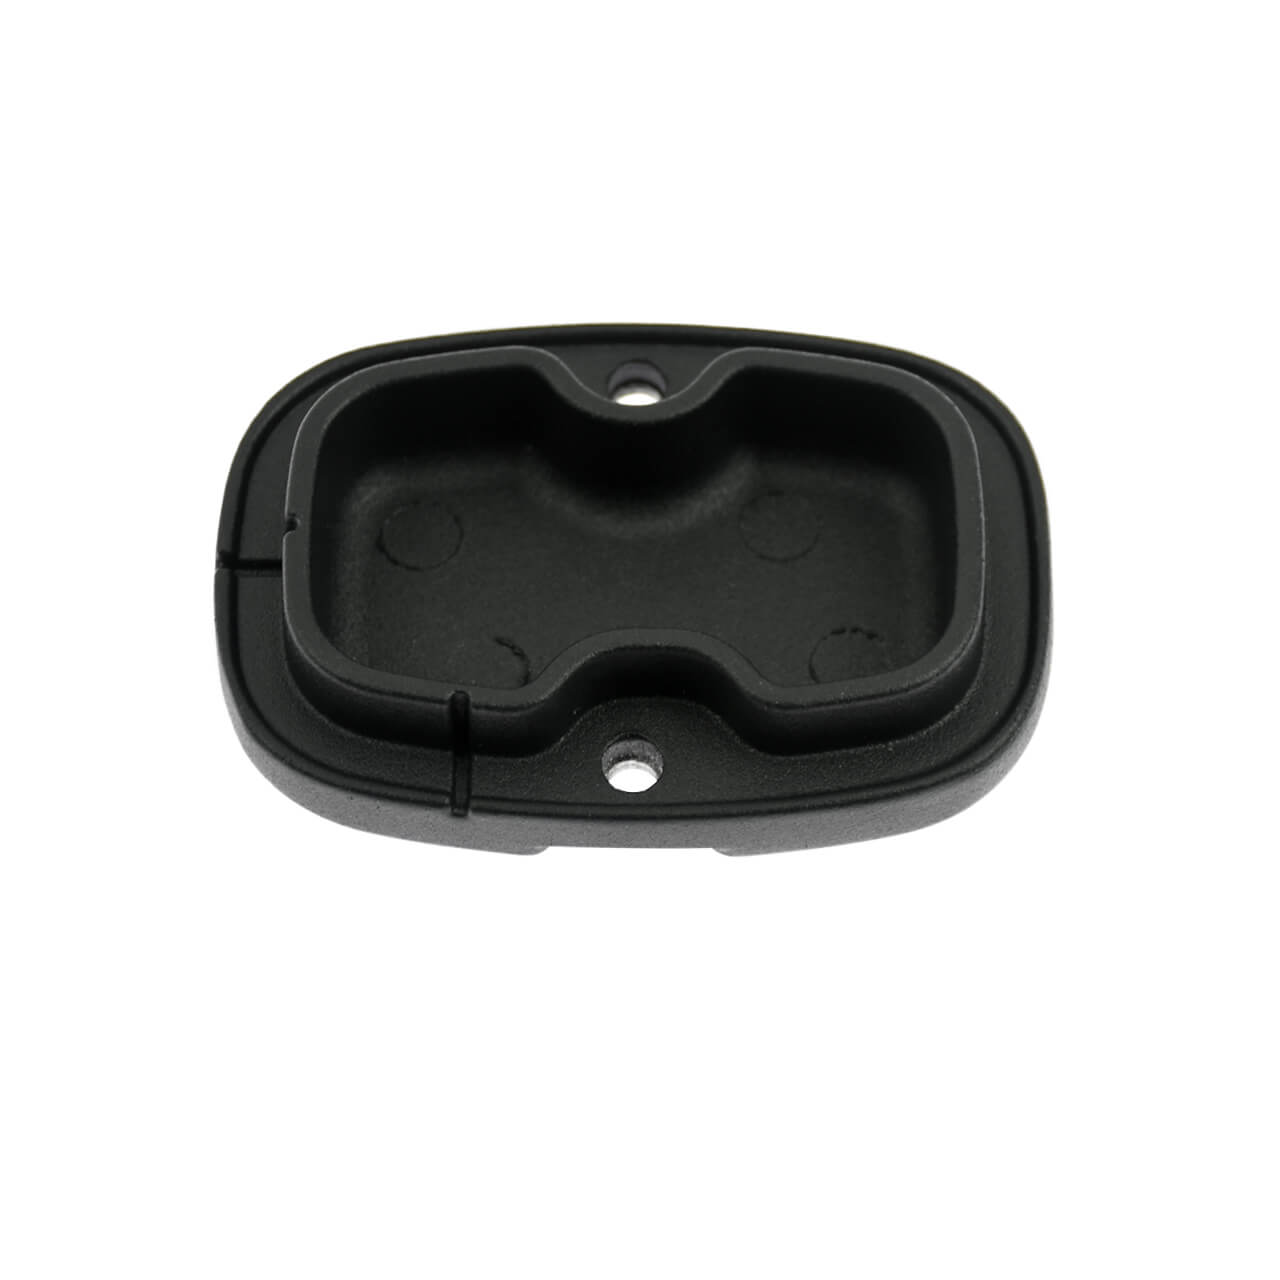 Rear Brake Master Cylinder Cover for Harley Touring 08-19 | Mactions